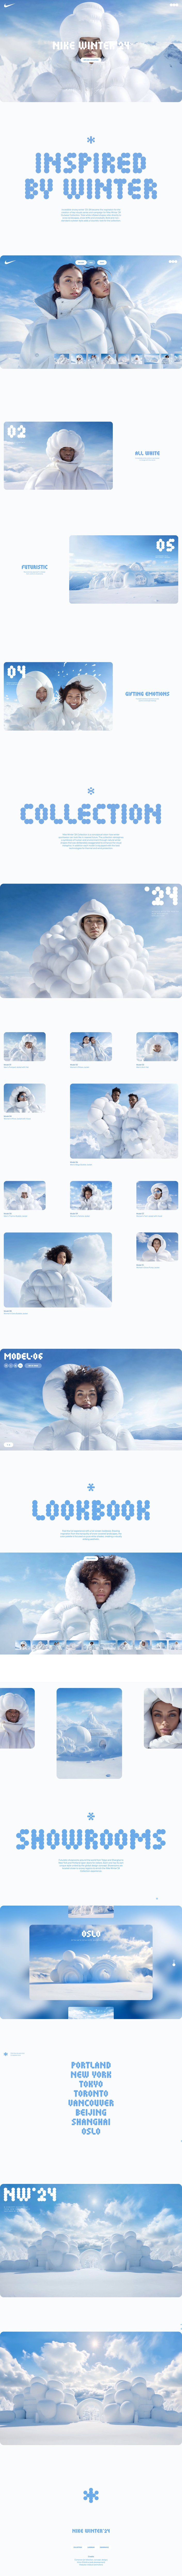 Nike Winter ‘24 Landing Page Example: Incredible snowy winter 23–24 became the inspiration for the creation of key visuals series and campaign for Nike Winter 24 Outwear Collection. Total white inflated shapes refer directly to snow landscapes, snow drifts and snowballs. Bold and non-standard outwear style adds a futuristic look for the collection.